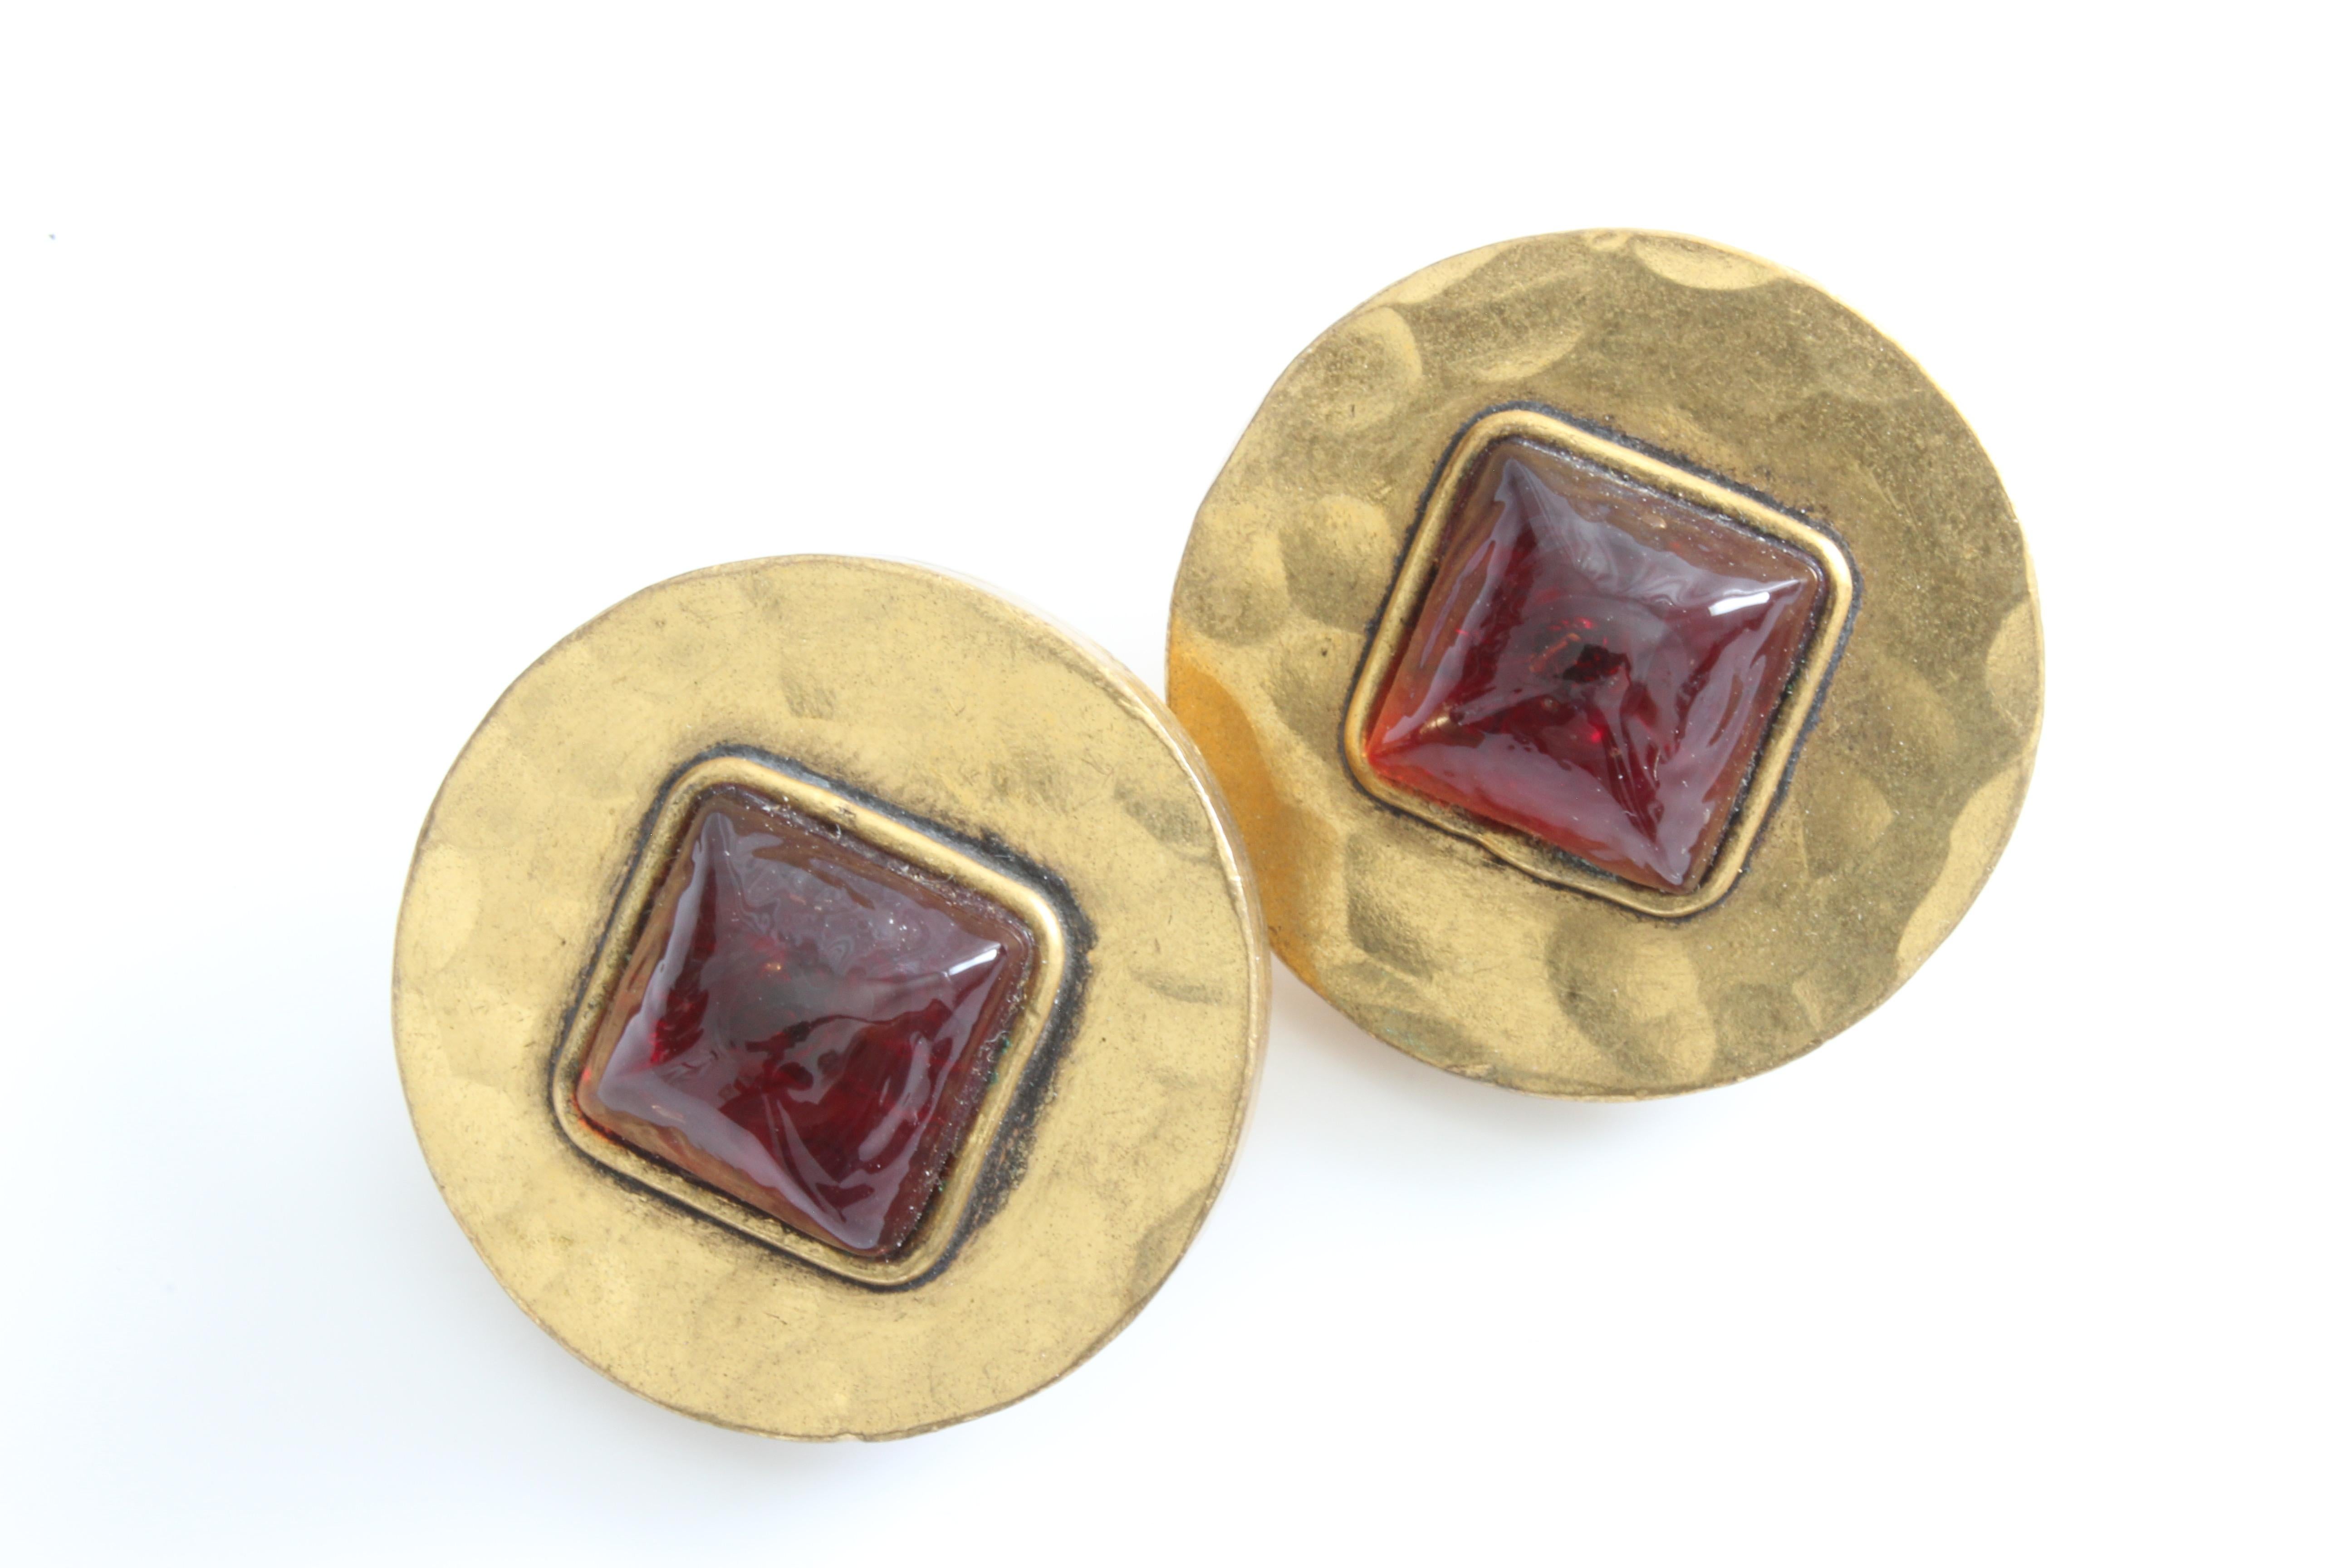 Here's a pair of earrings from CHANEL, likely made in the 1970s.  Made from hammered gold metal, they feature chunky dark red Gripoix centers and fasten clip style. In very good condition for their age, we note patina and scratching to the gold